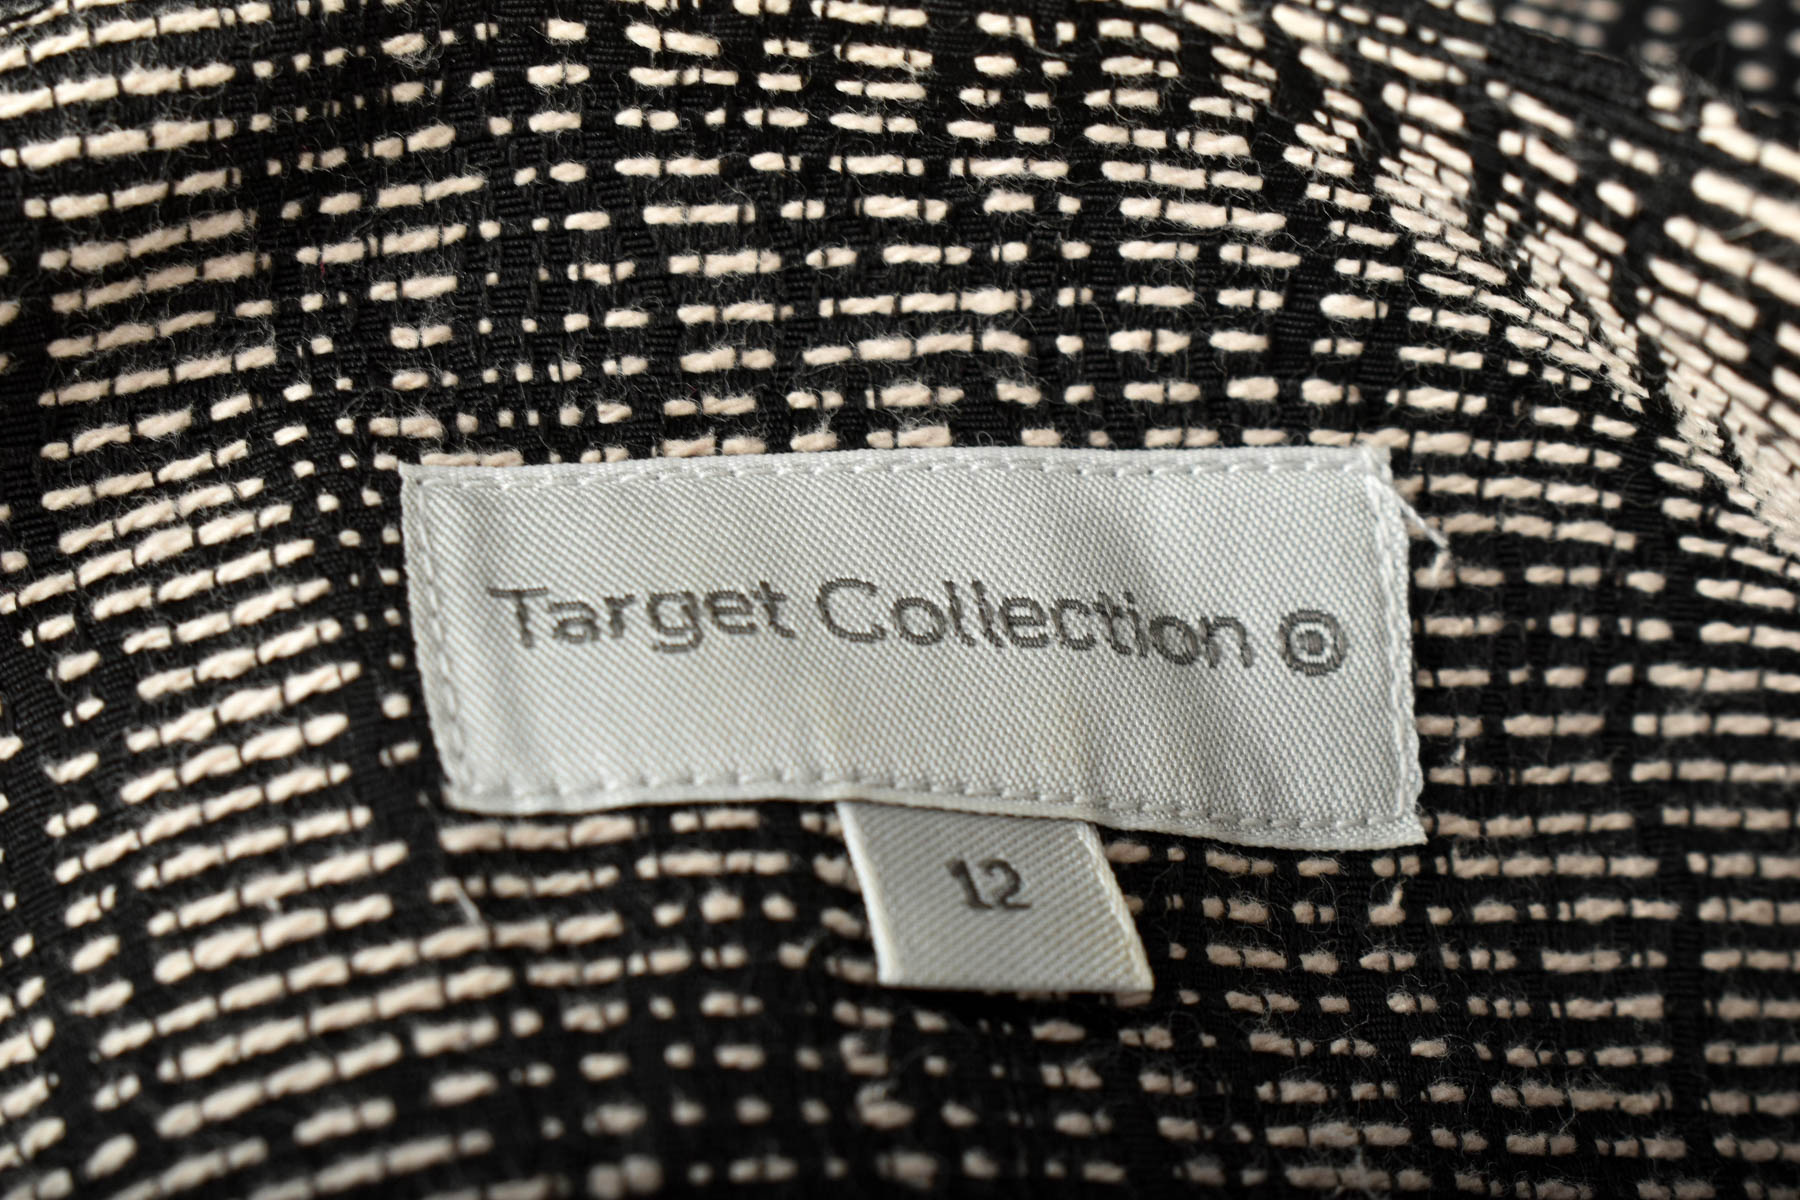 Дамско сако - Target Collection - 2